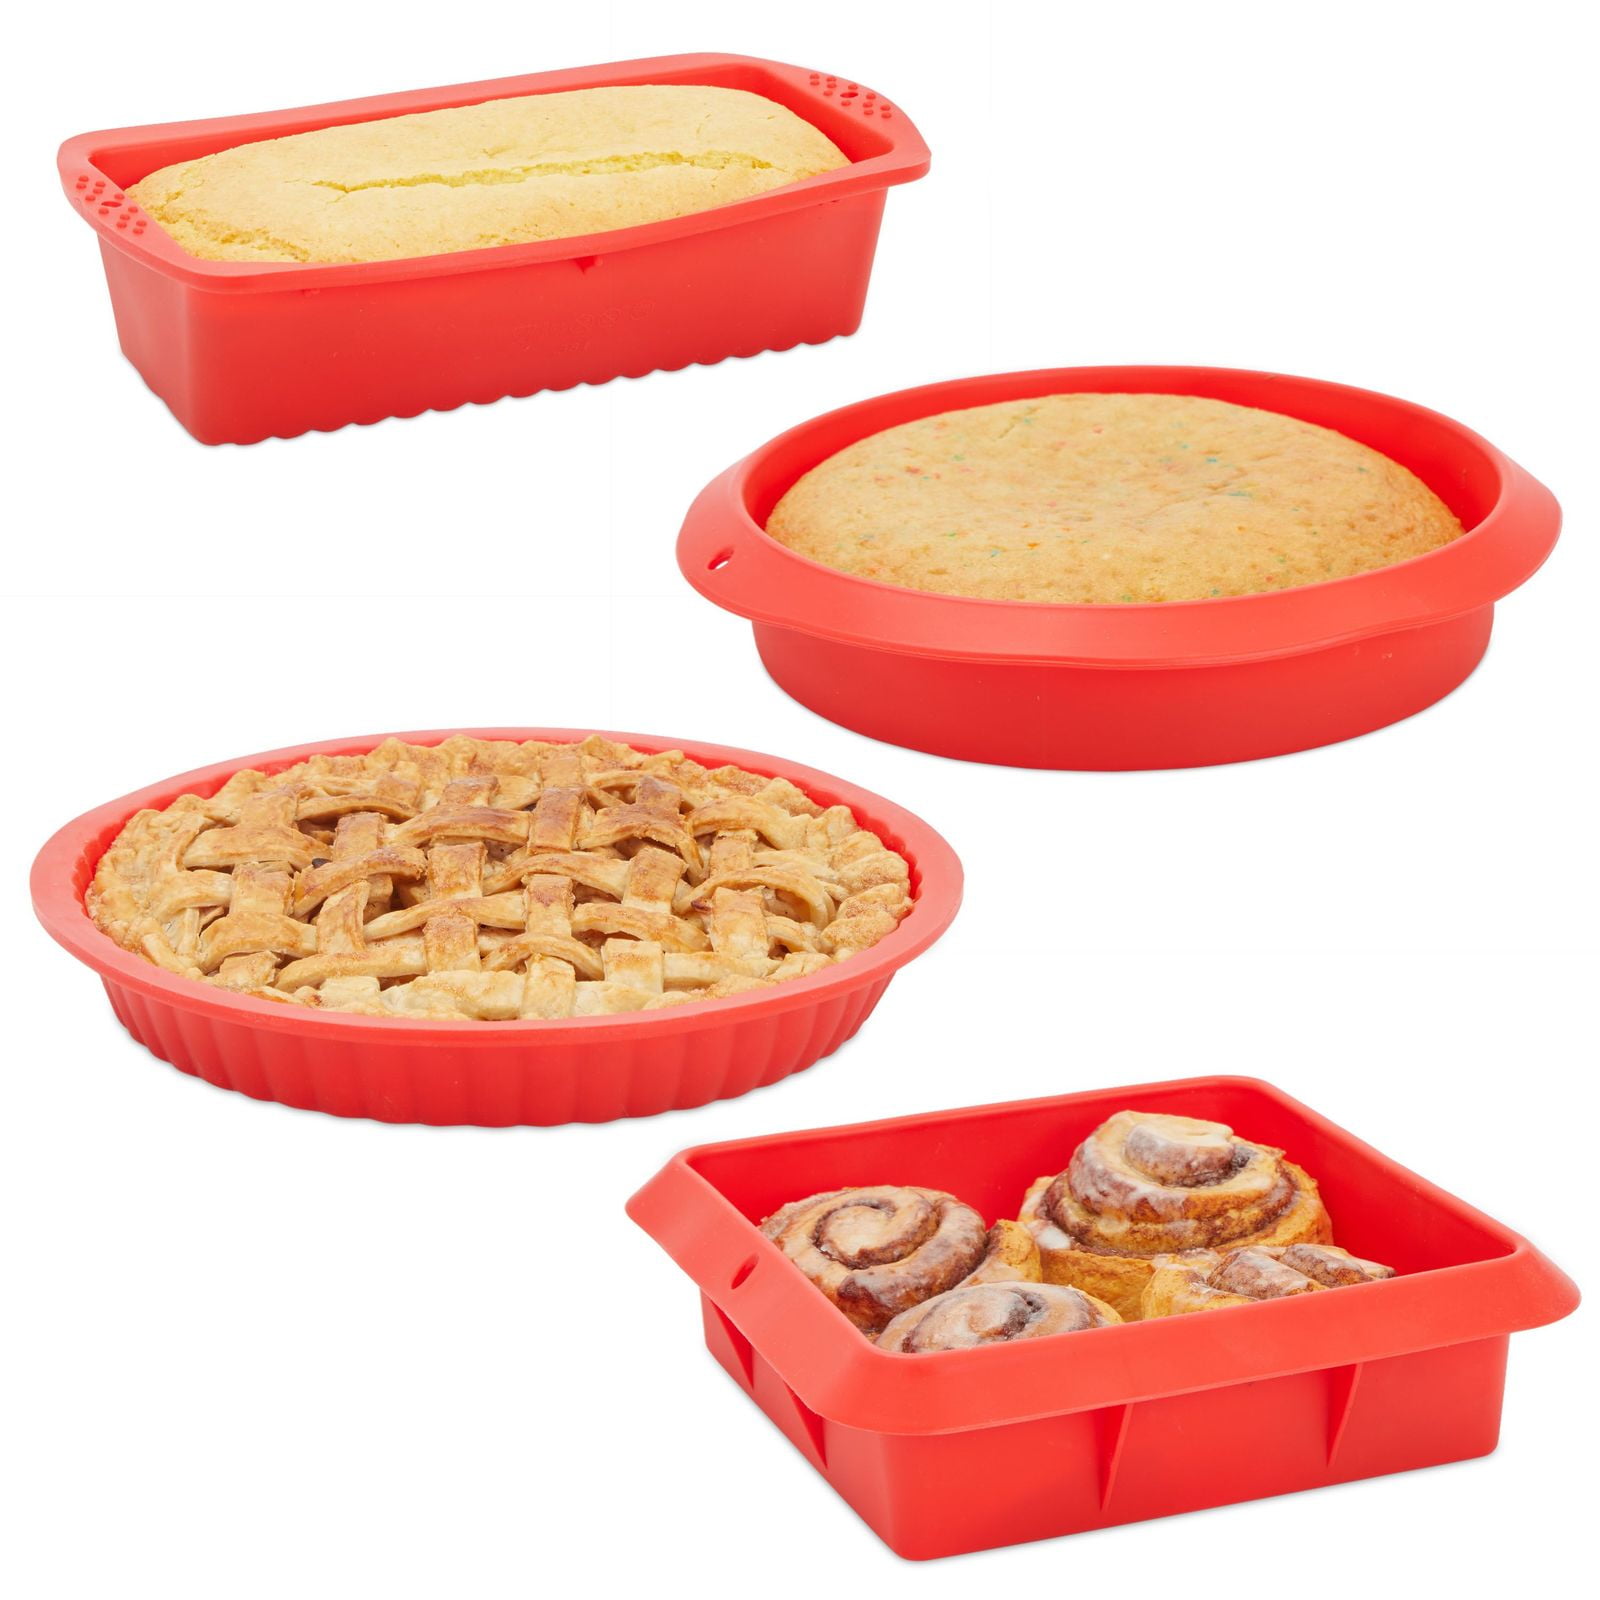 Details about   6/8/9" Silicone Round Bread Mold Cake Pan Muffin Mould Baking Tray Tool Z5K3 